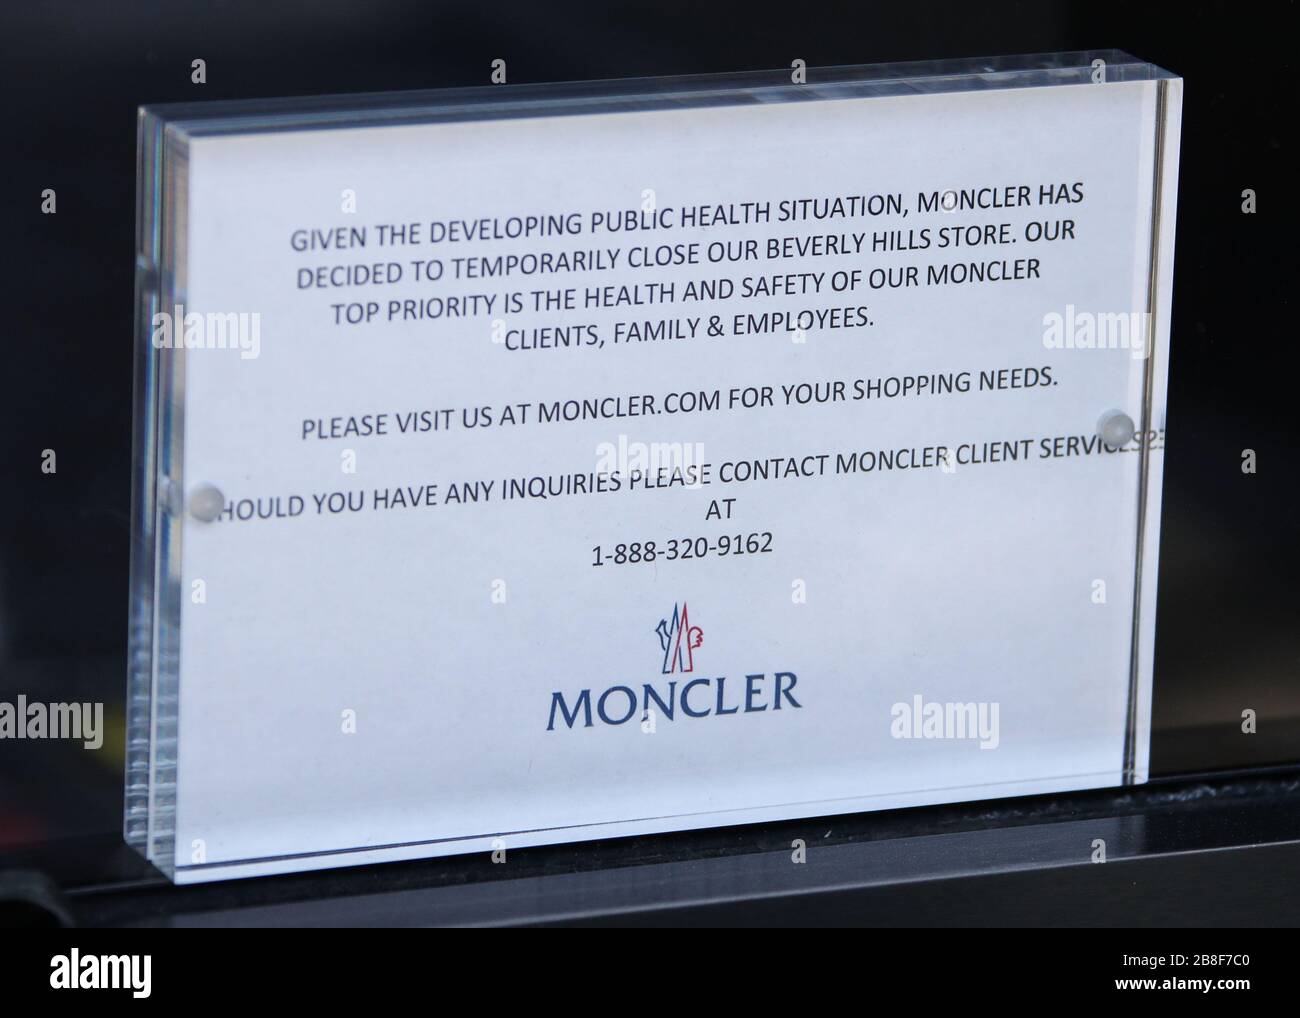 BEVERLY HILLS, LOS ANGELES, CALIFORNIA, USA - MARCH 21: Moncler Beverly  Hills Rodeo Drive store, temporarily closed due to the coronavirus, two  days after the 'Safer at Home' order issued by both